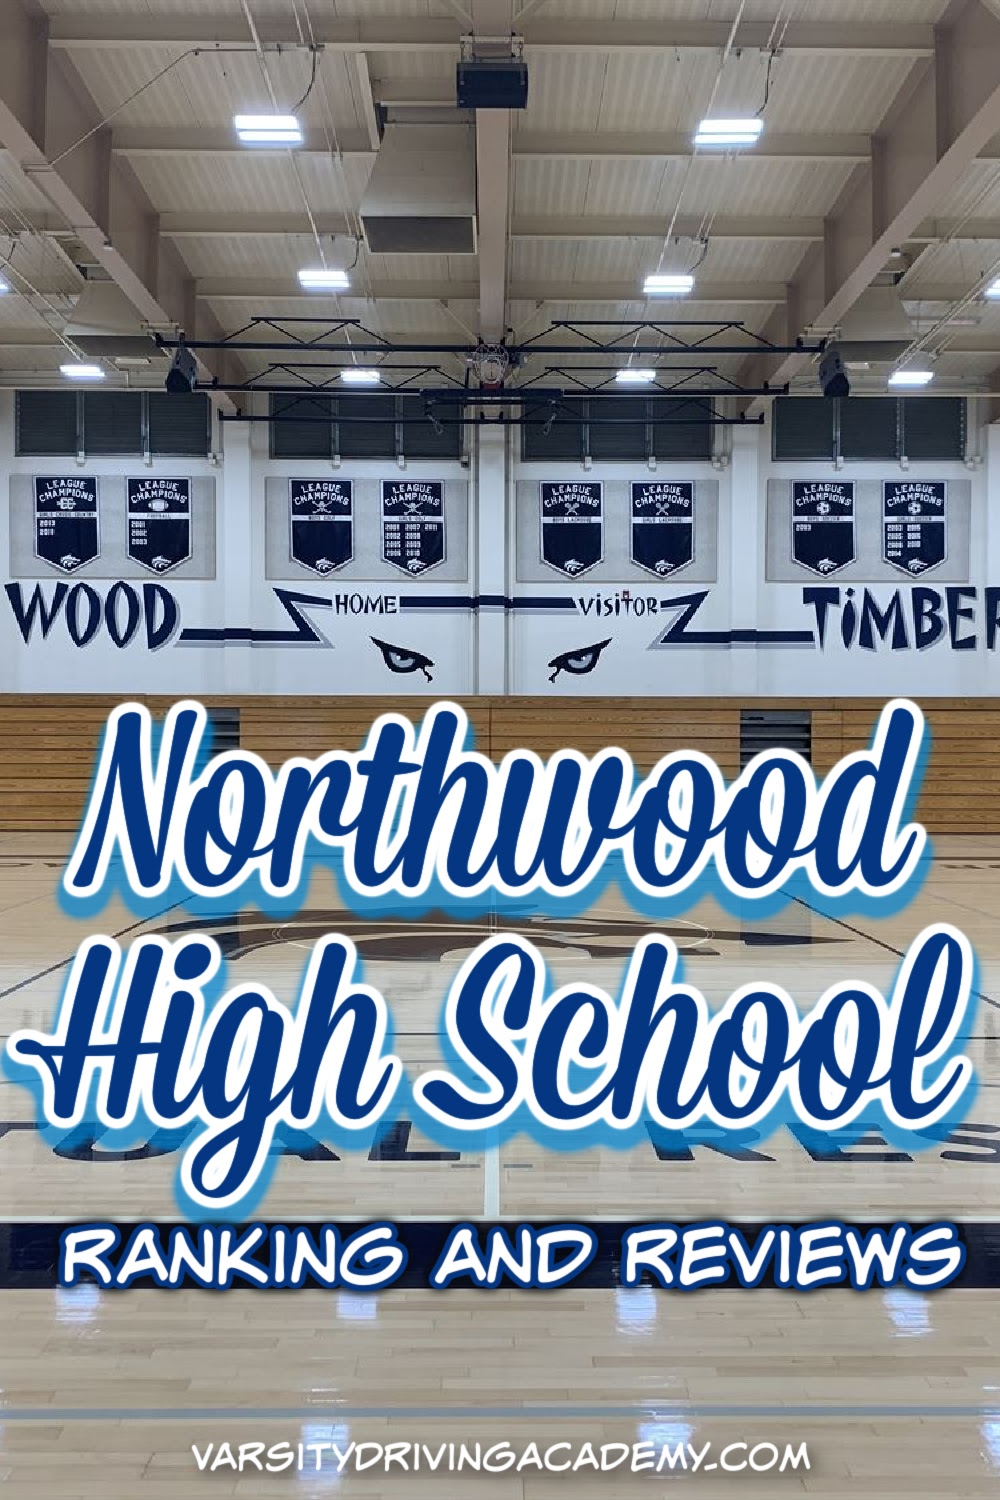 Irvine is a great place for families to call home and Northwood High School is a prime example of what makes Irvine so amazing.